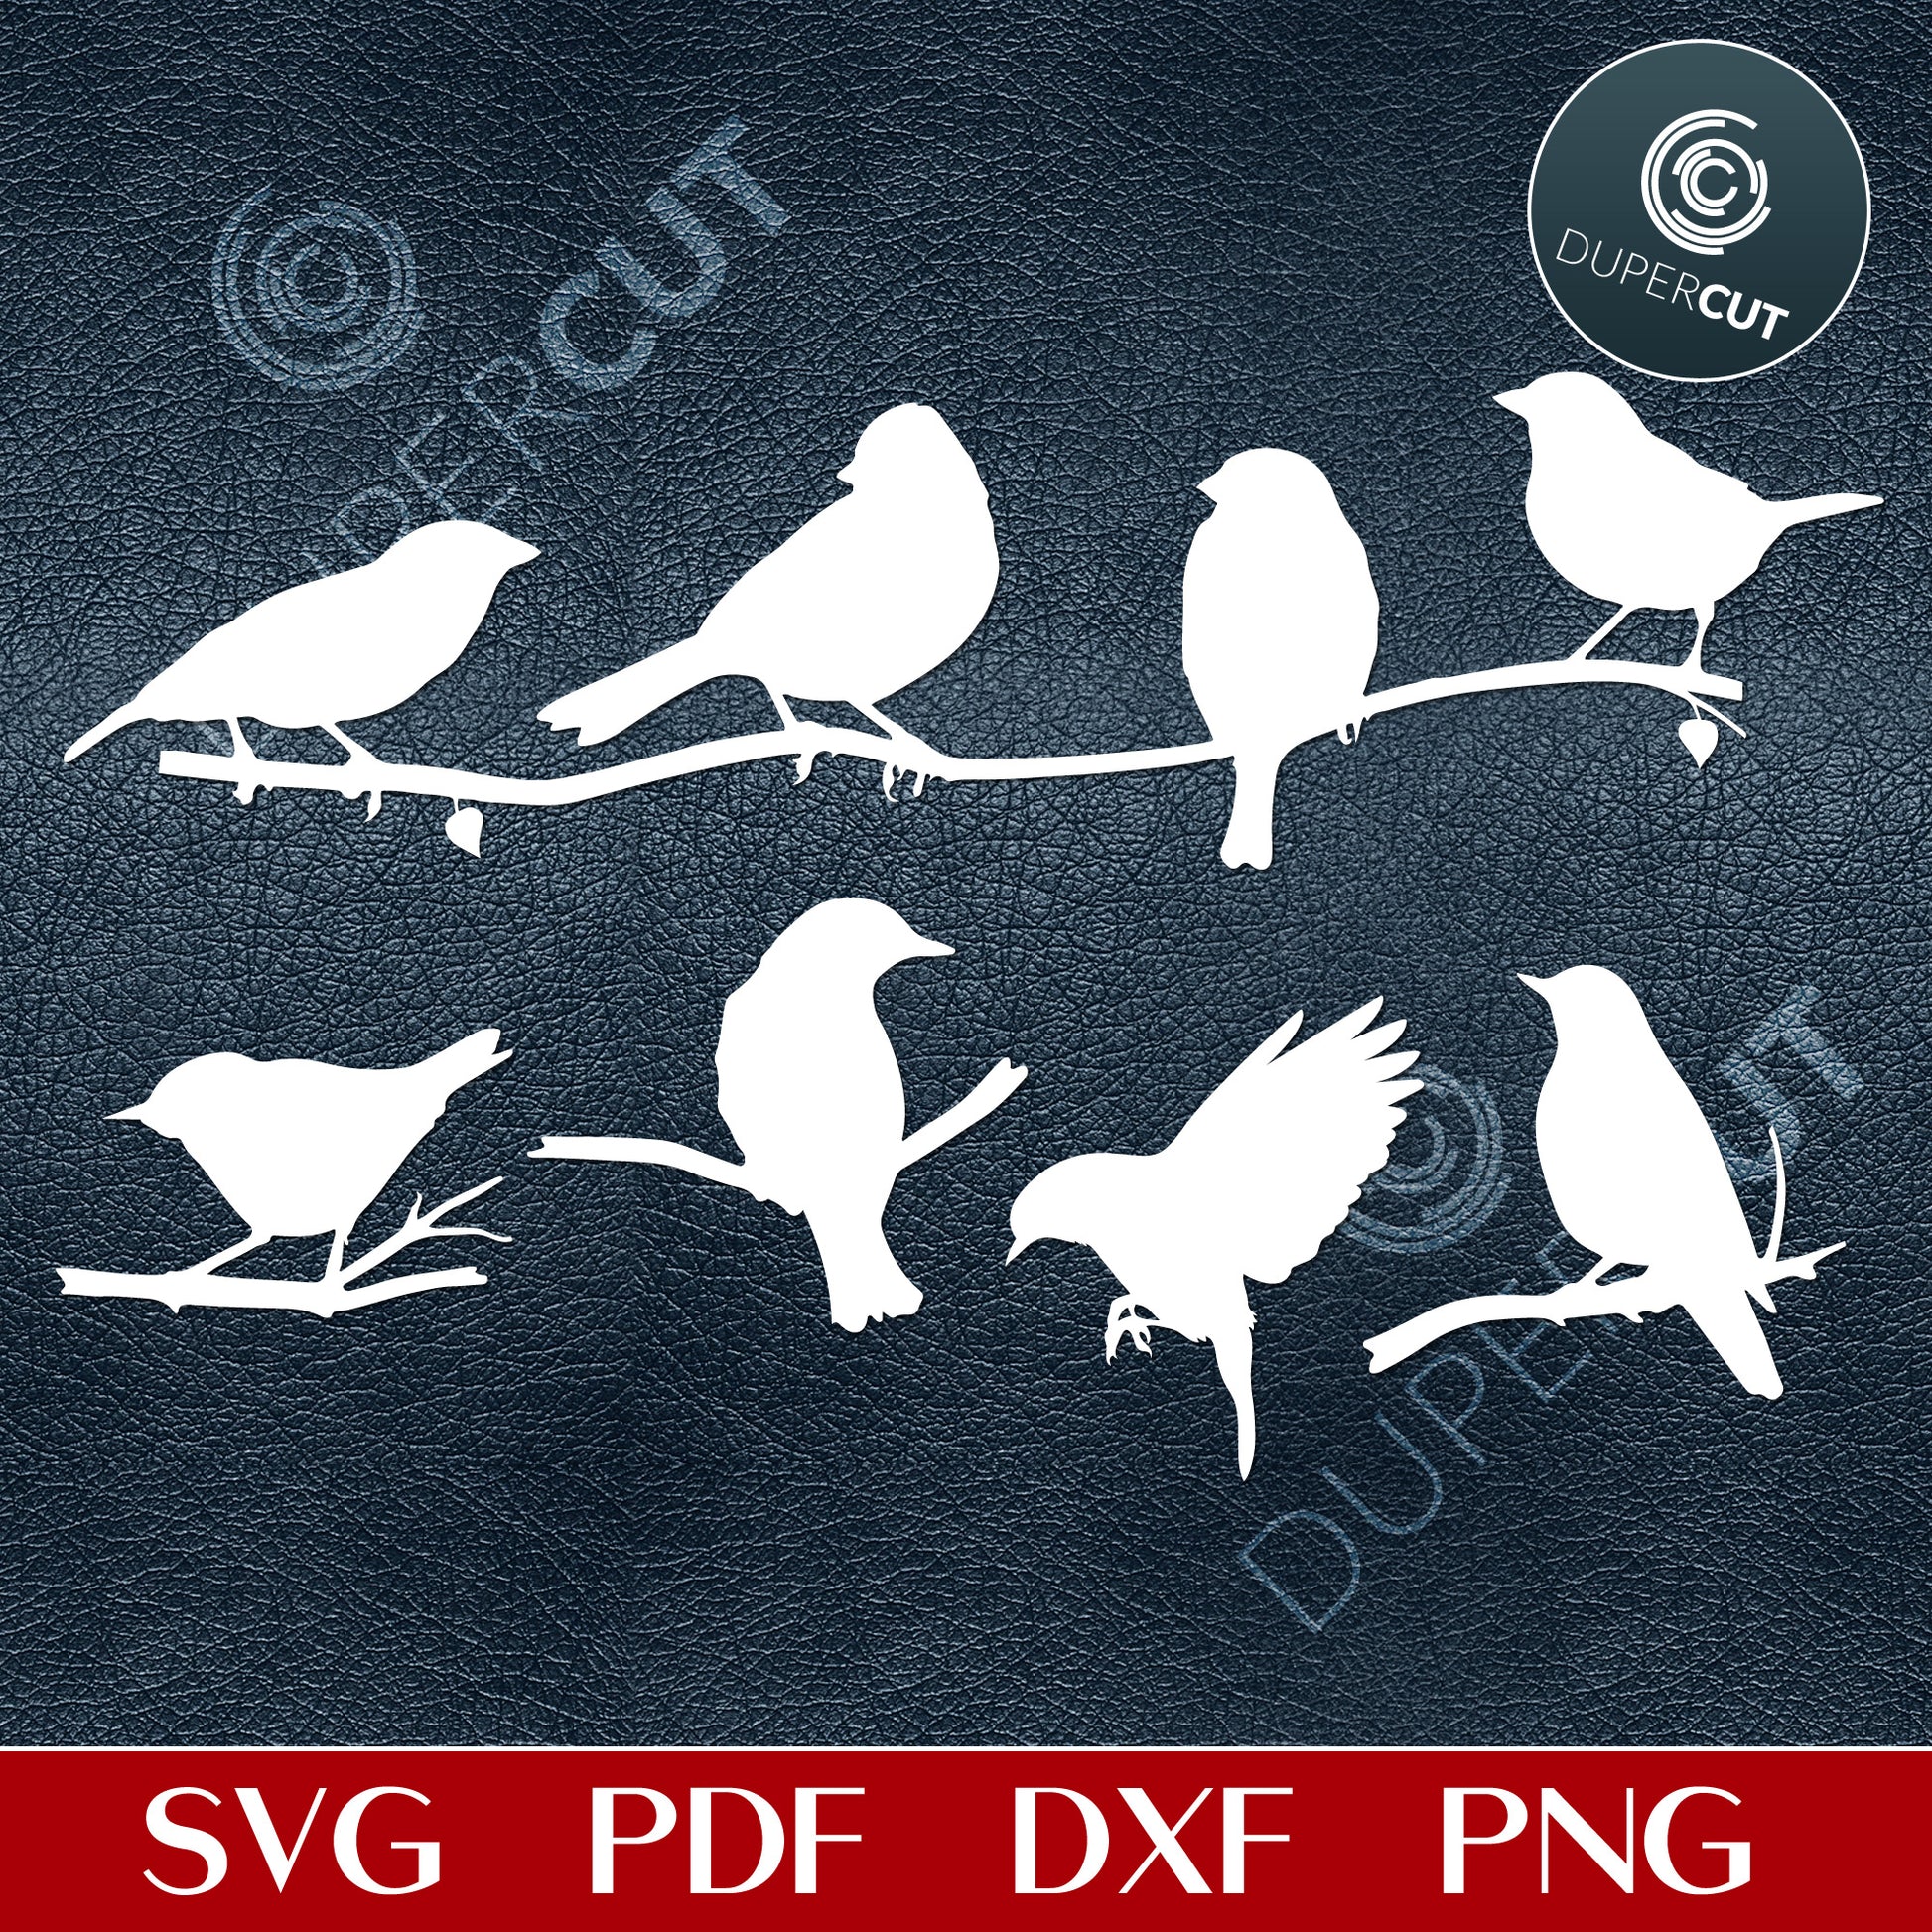 Birds printable silhouettes - SVG DXF PNG vector files for laser and CNC machines, Cricut, Silhouette Cameo, Glowforge projects. 